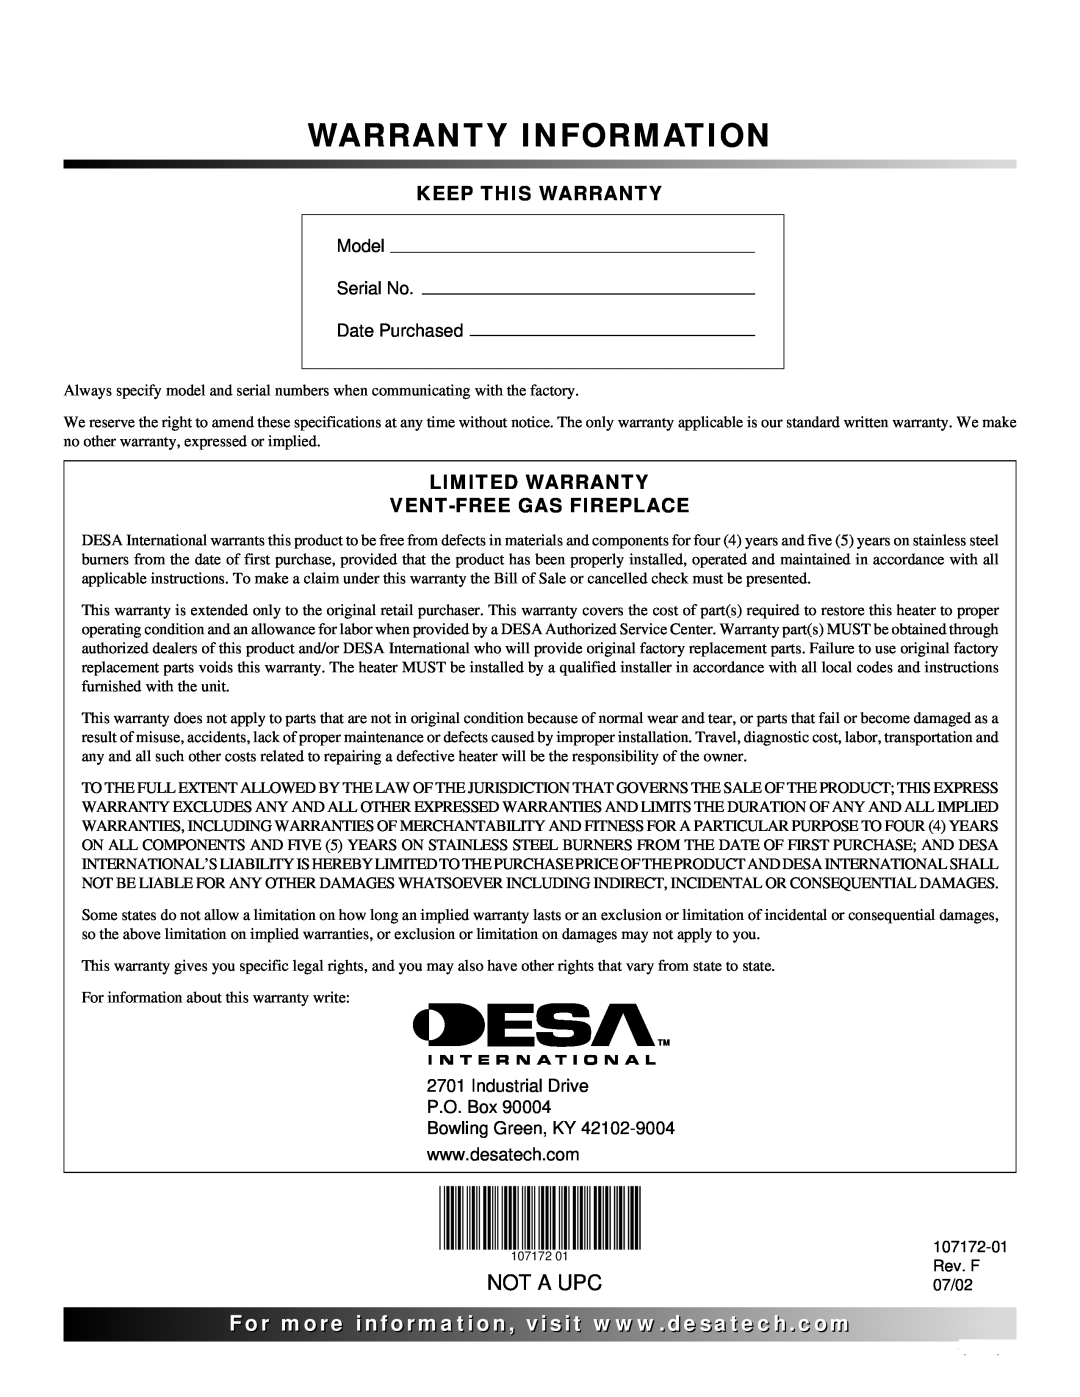 Desa EFS33PR Not A Upc, Keep This Warranty, Limited Warranty Vent-Freegas Fireplace, Model Serial No Date Purchased 